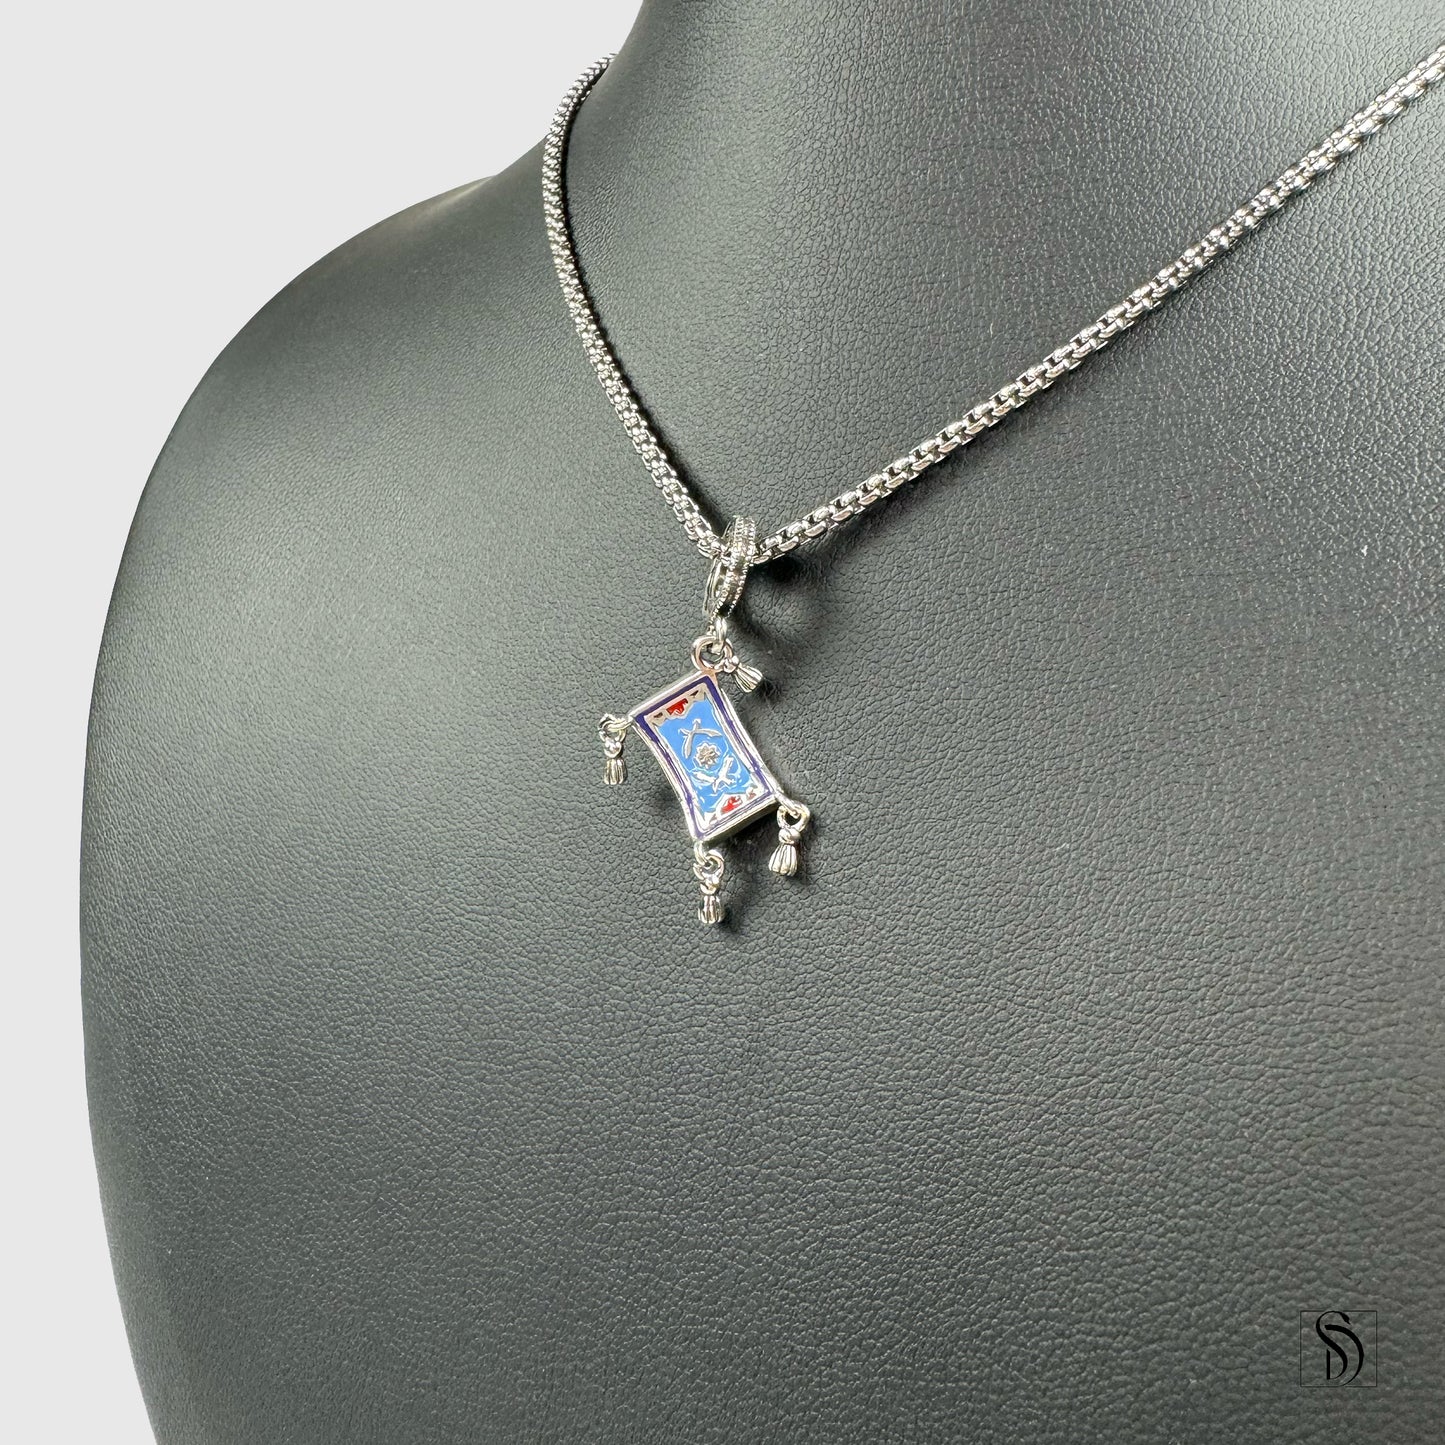 Silver Aladdin Inspired Flying Carpet Pendant Necklace